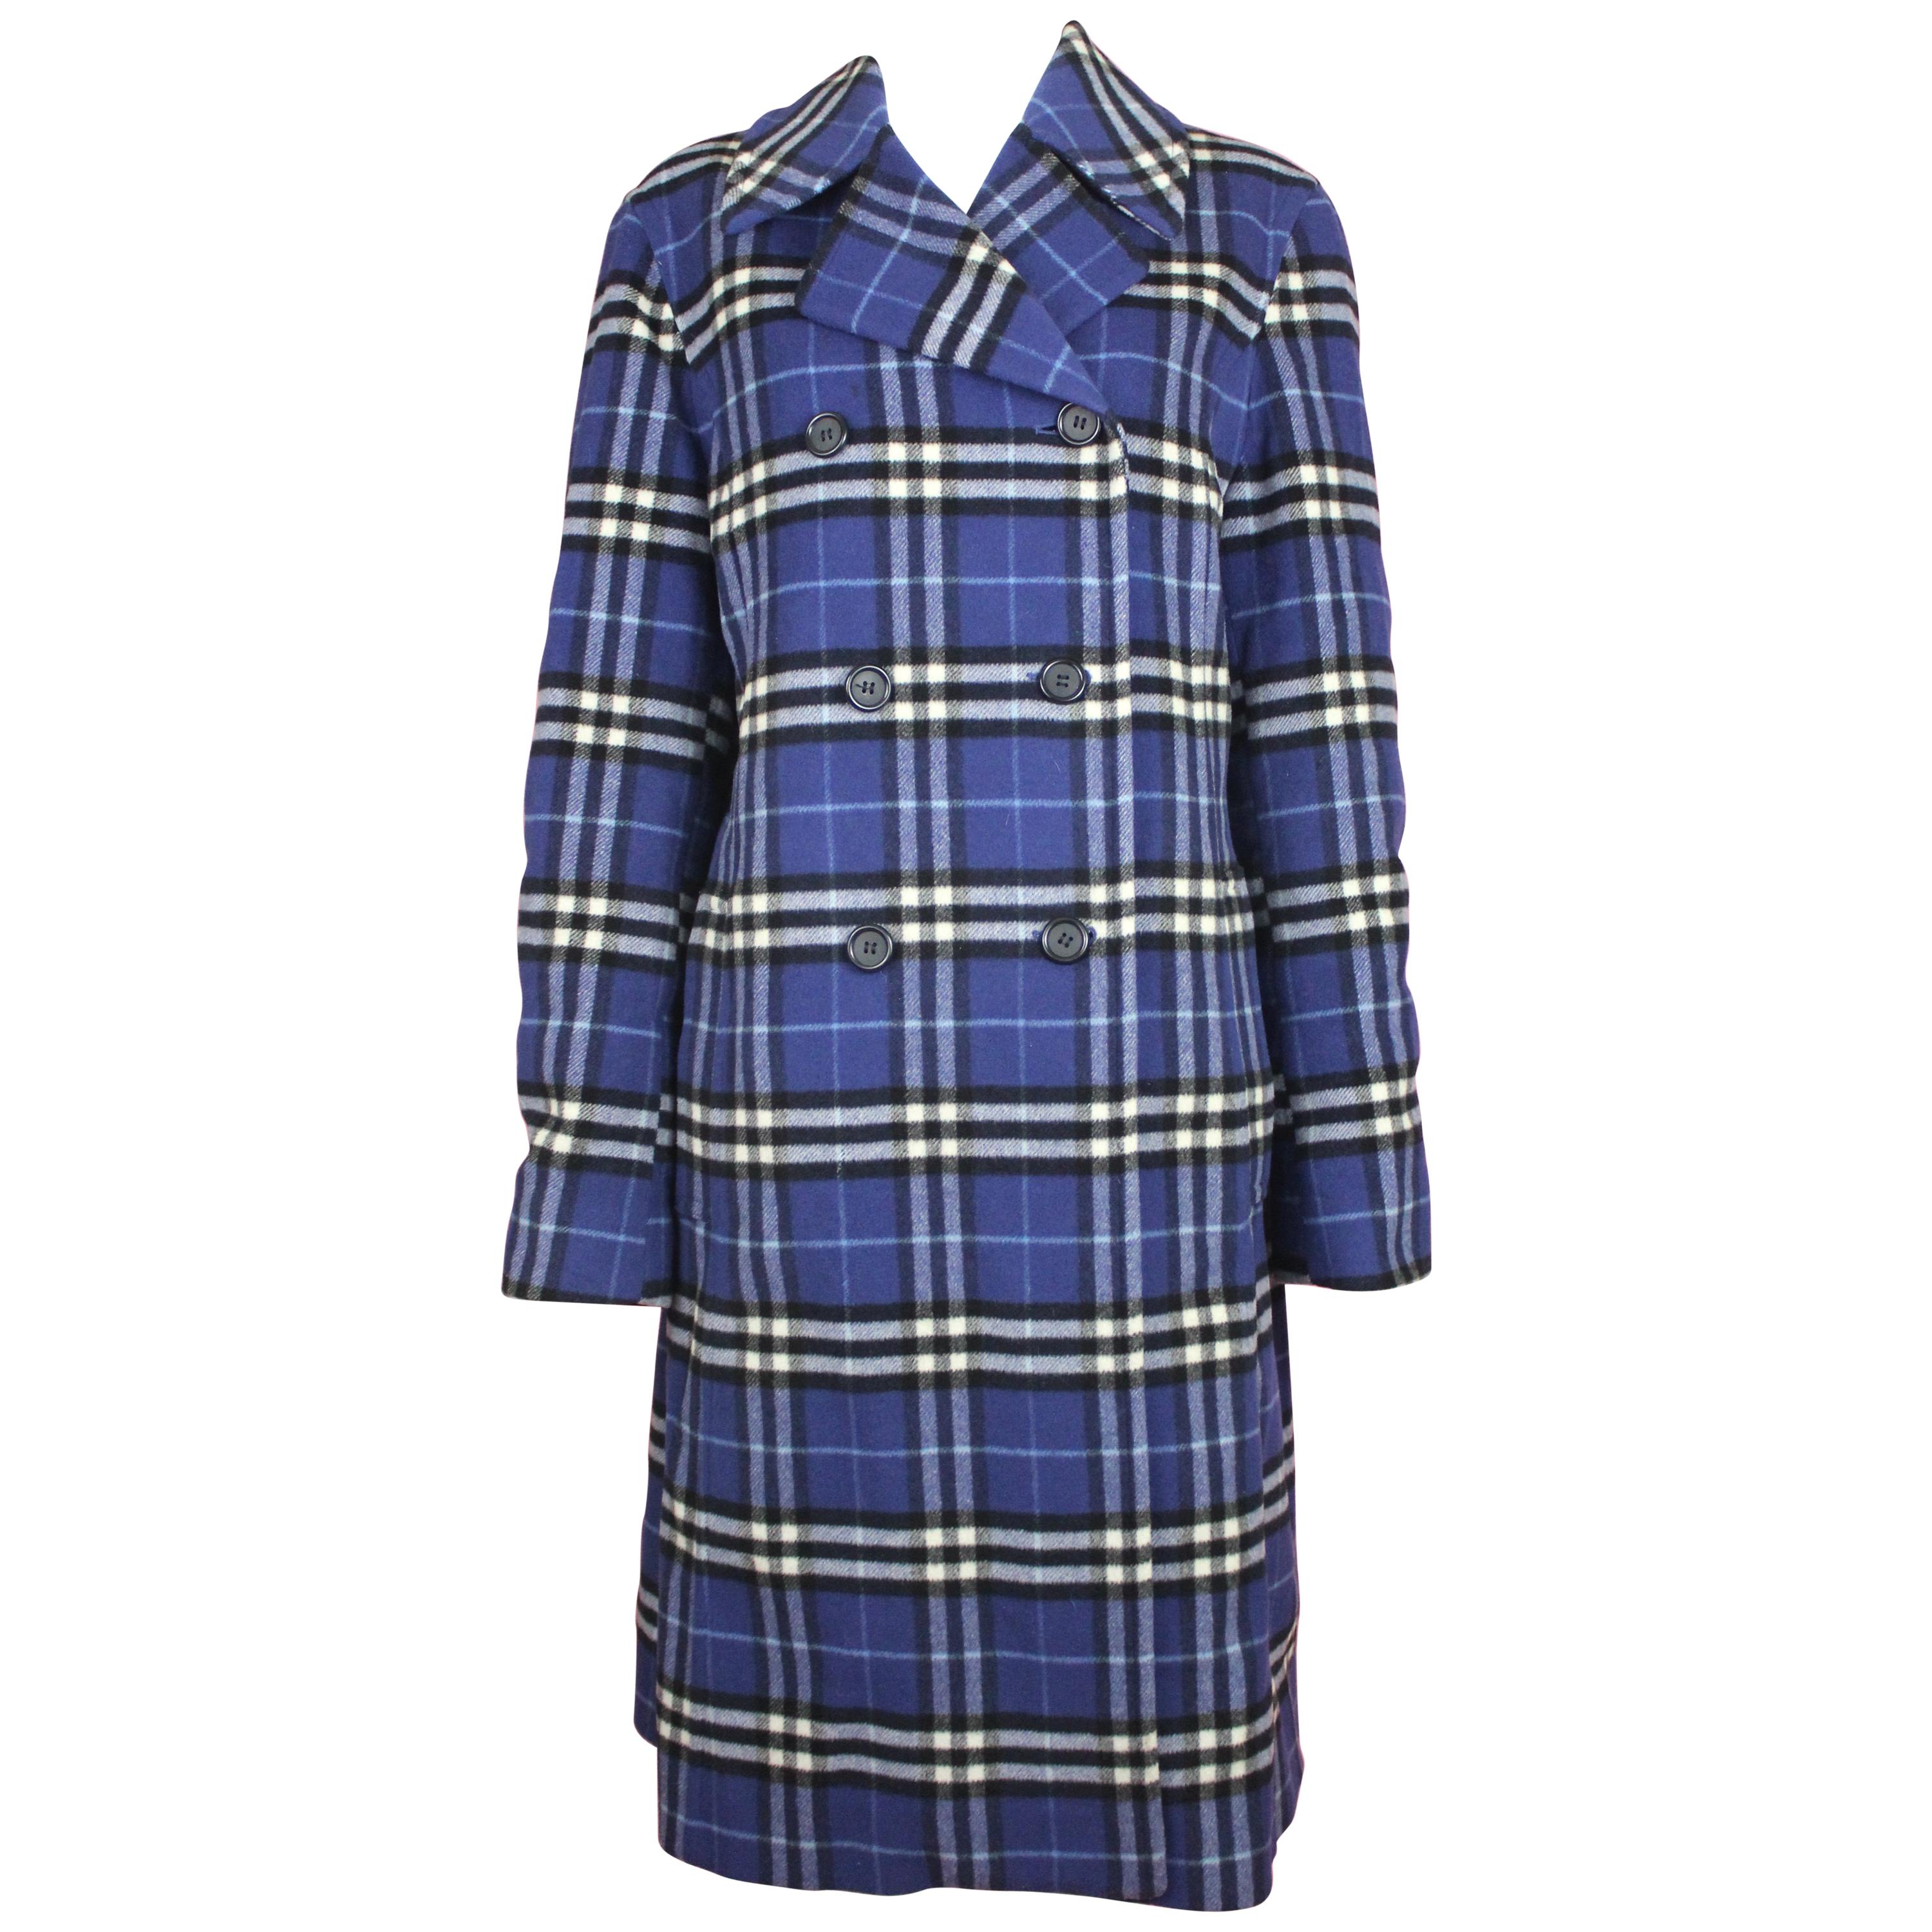 Burberry Women's Double Breasted Coat in Blue Check, c. 2000's, size 6 US For Sale